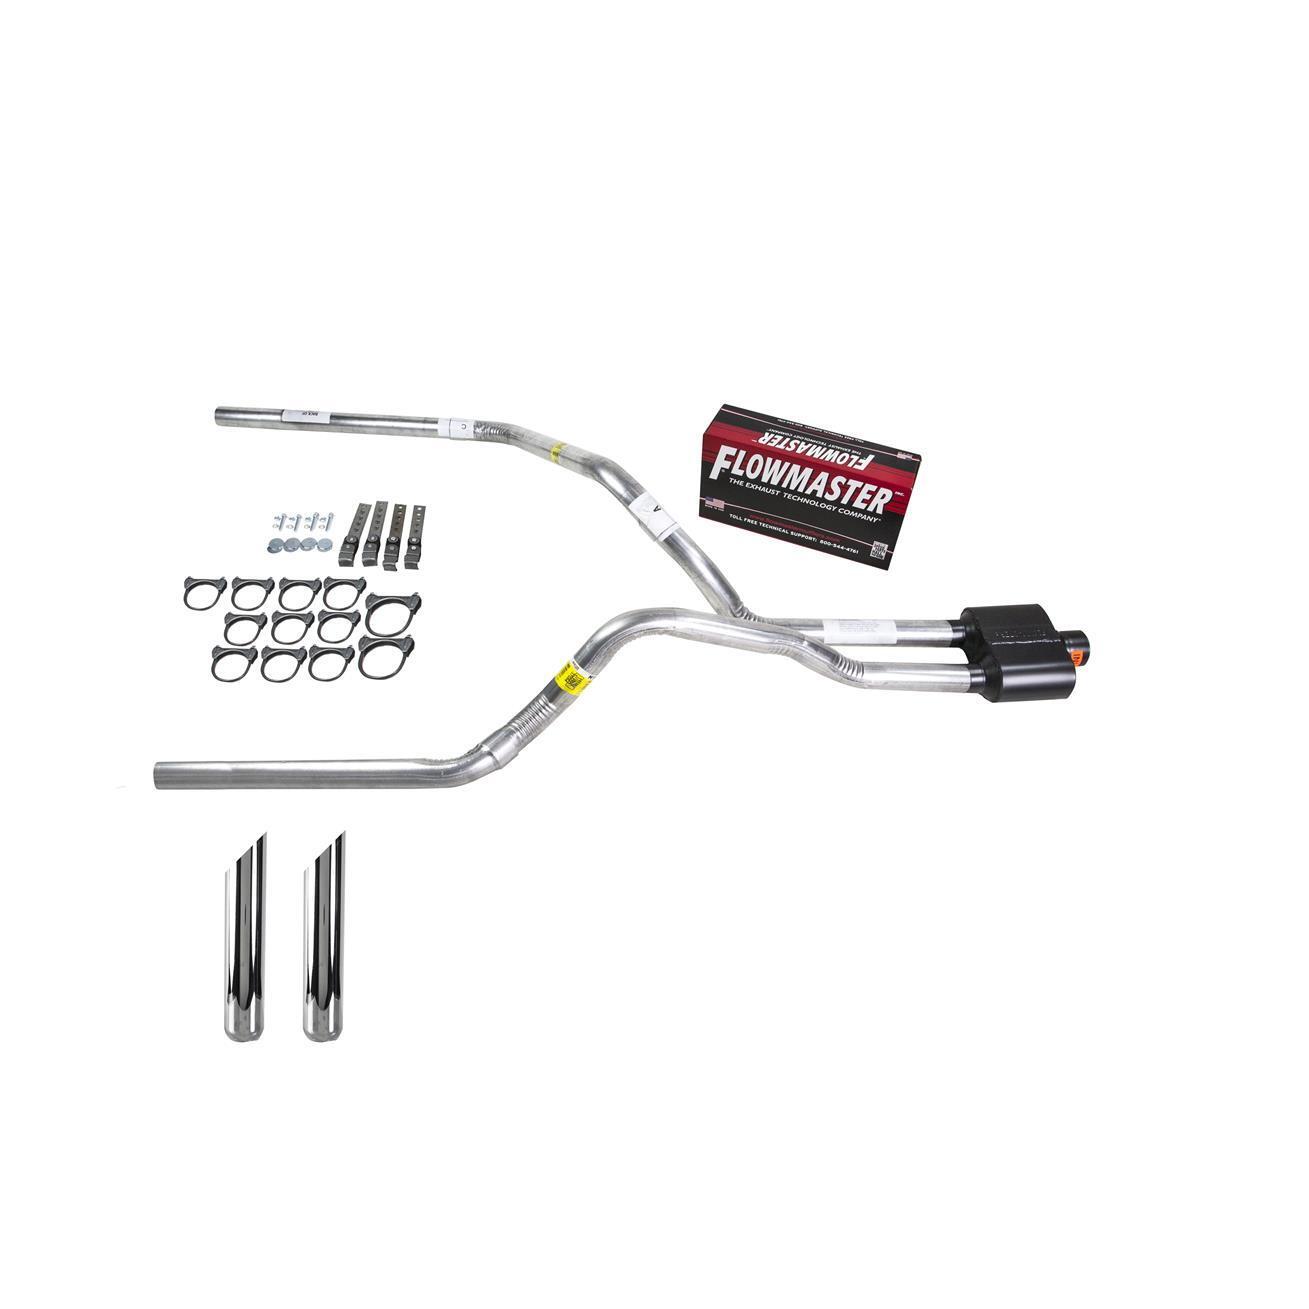 Max 63% OFF F150 Super intense SALE 98-04 dual exhaust 2.25 pipe Tip Super SW 10 Flowmaster